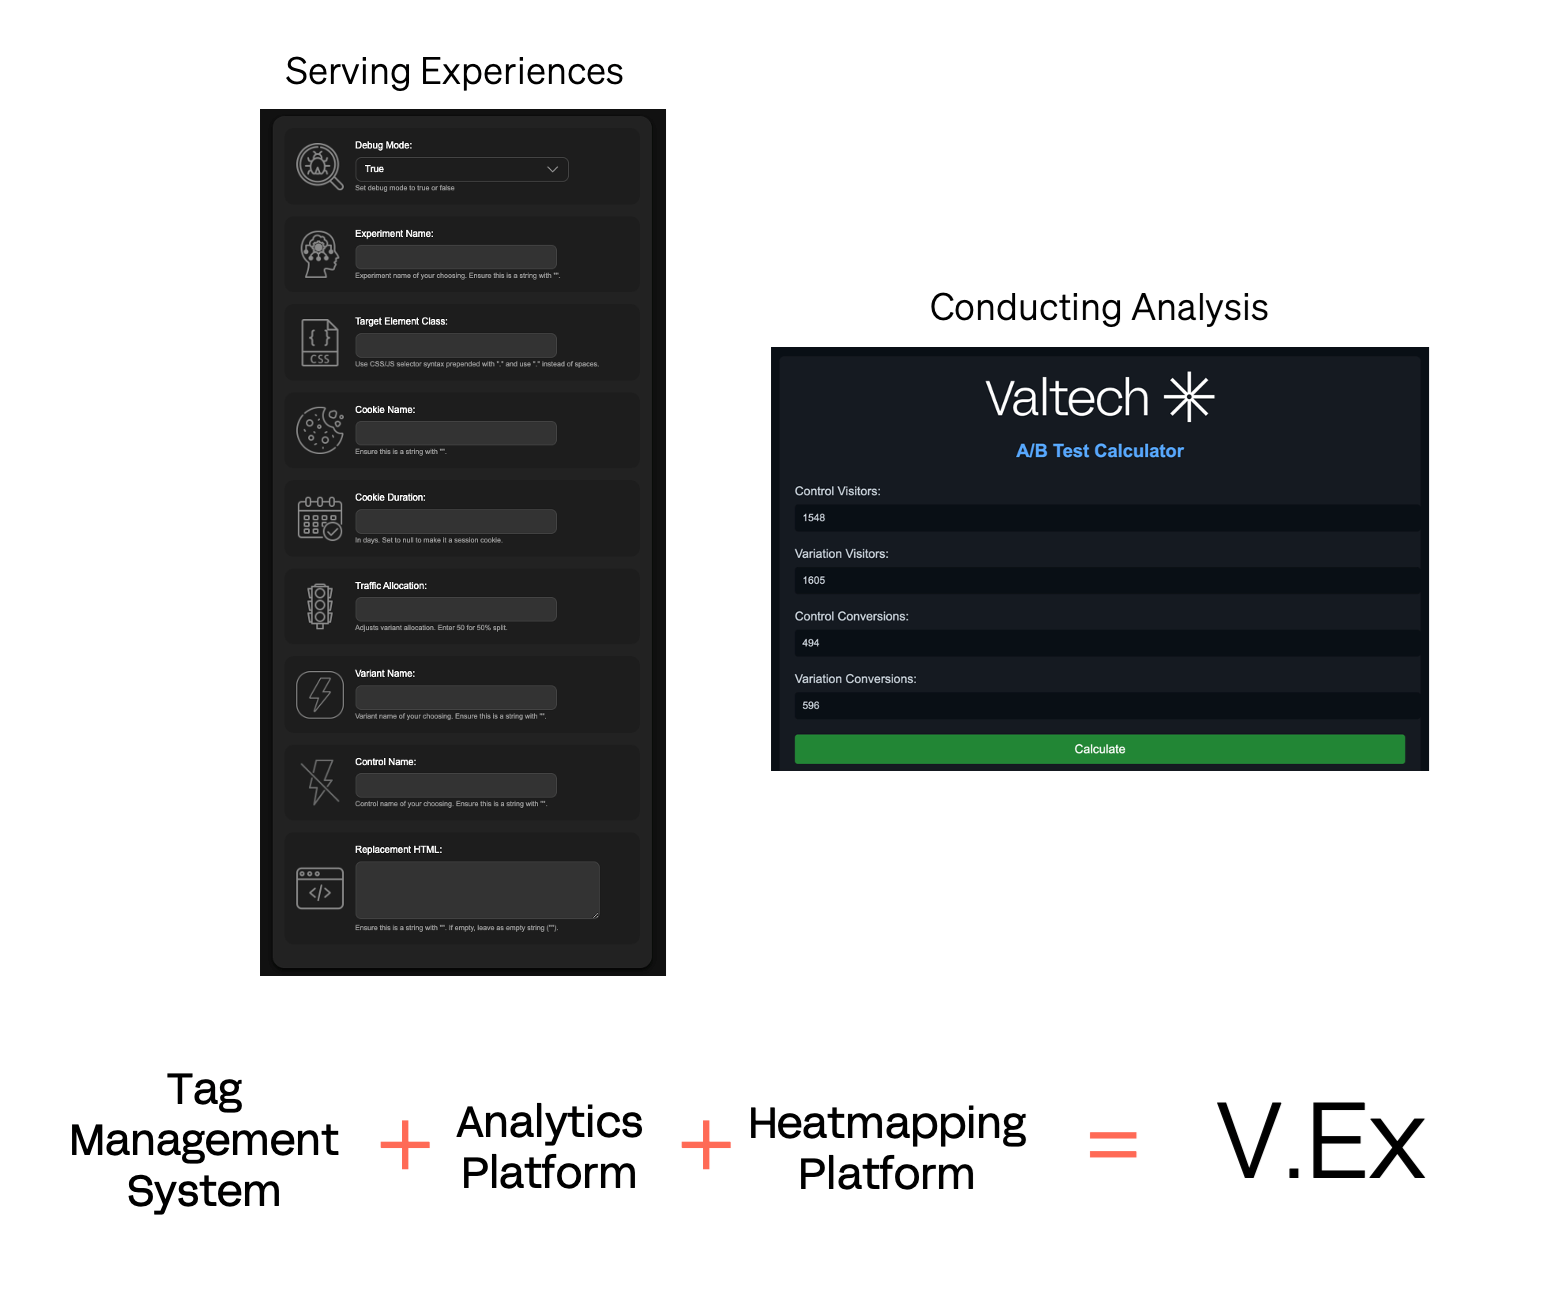 Example of the ‘V.Ex’ product with a Serving Experiences and Conducting Analysis screen, together with the equation Tag Management System plus Analytics Platform plus Heatmapping Platform equates V.Ex